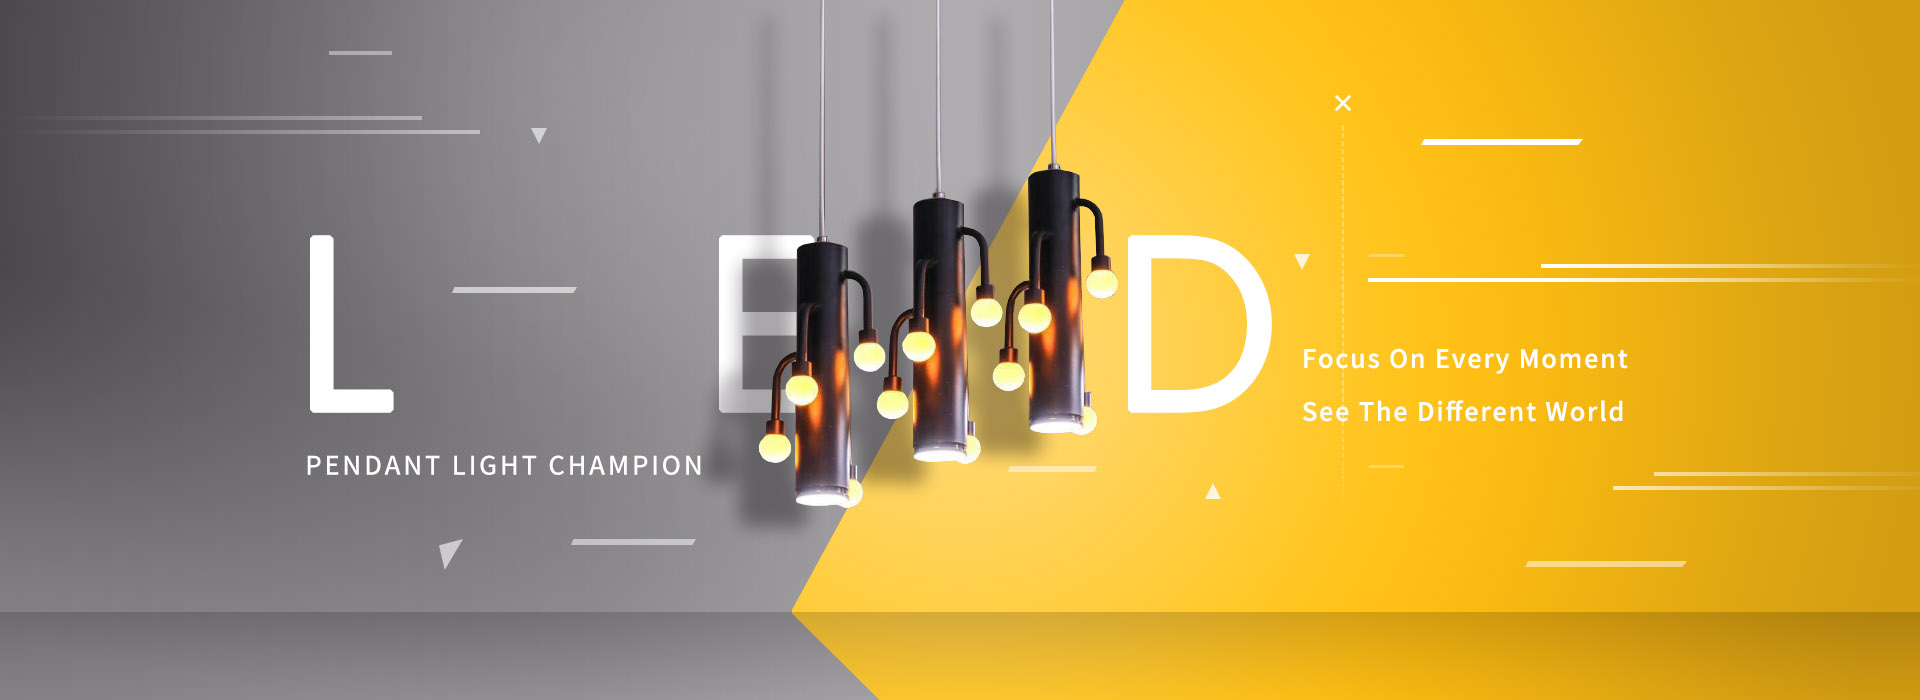 RPendant light Champion,Focus On Every Moment See The Different World